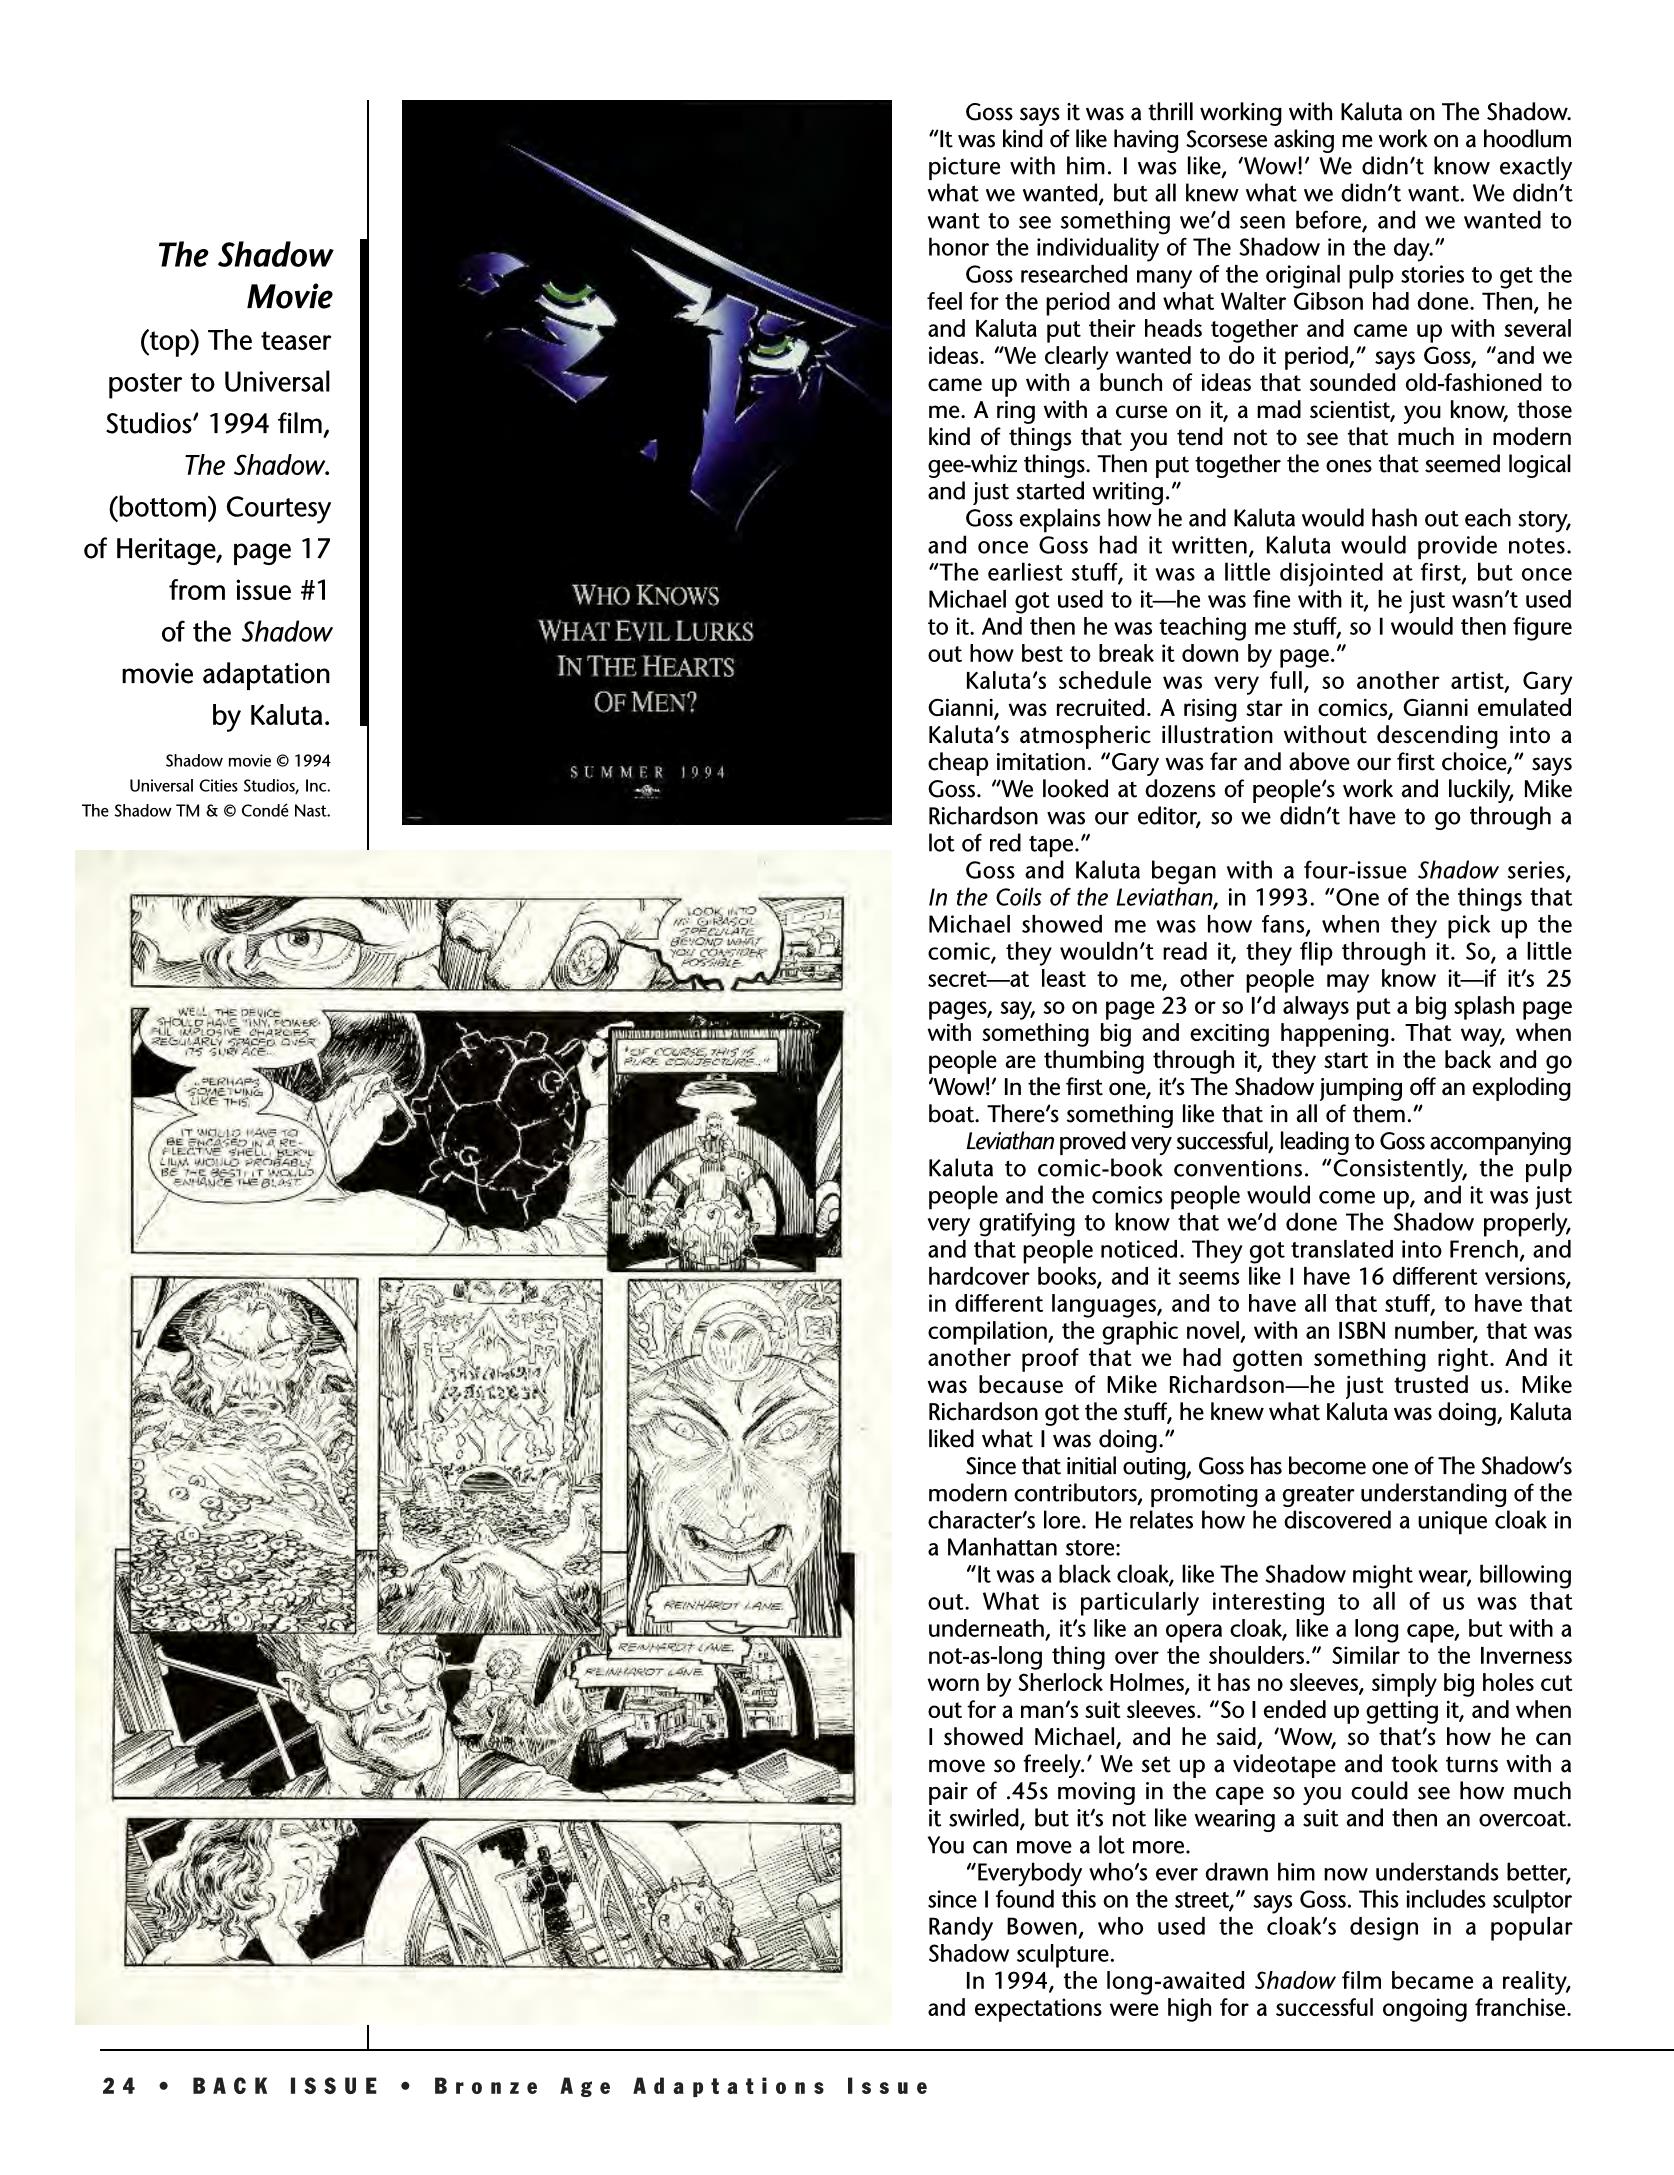 Read online Back Issue comic -  Issue #89 - 19